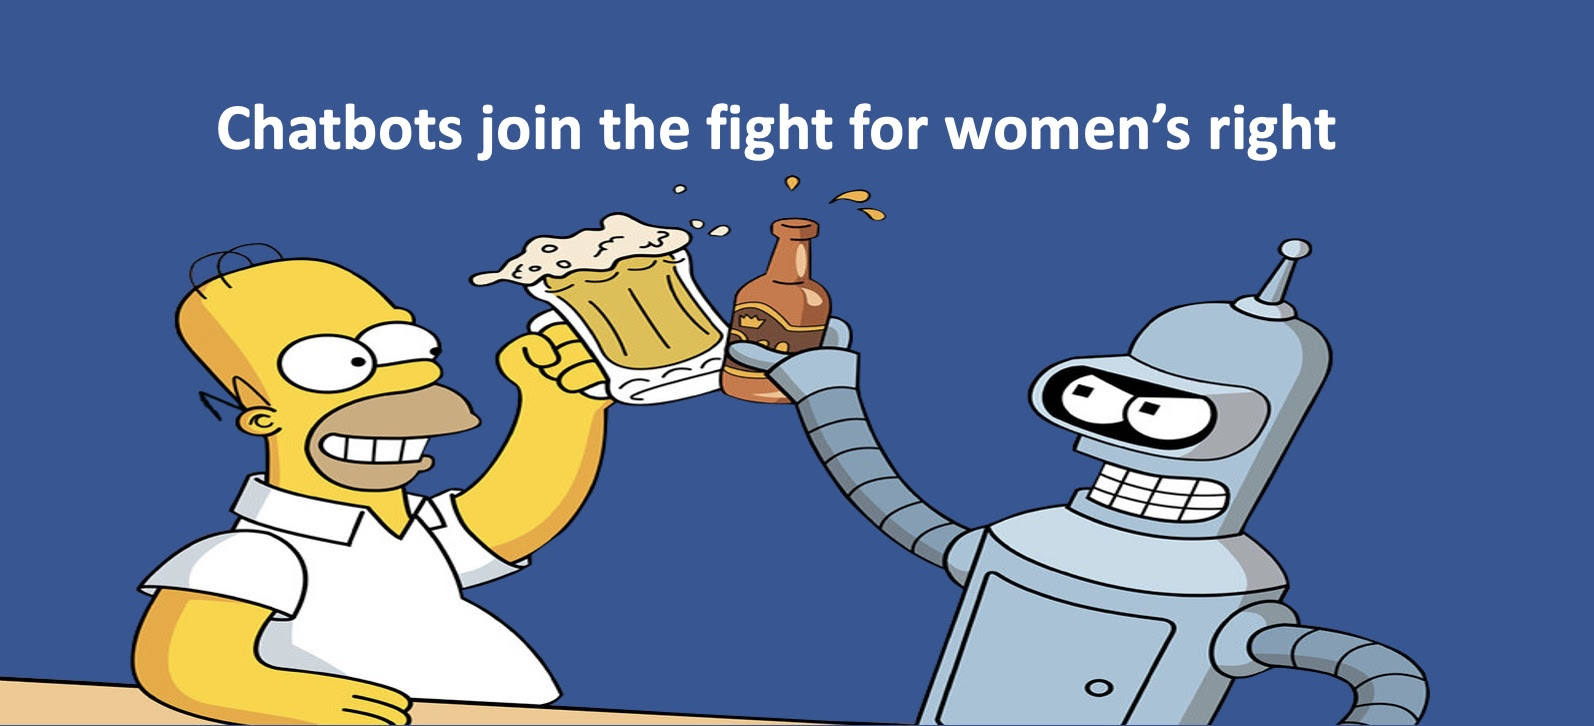 Chatbots join the fight for women's rights